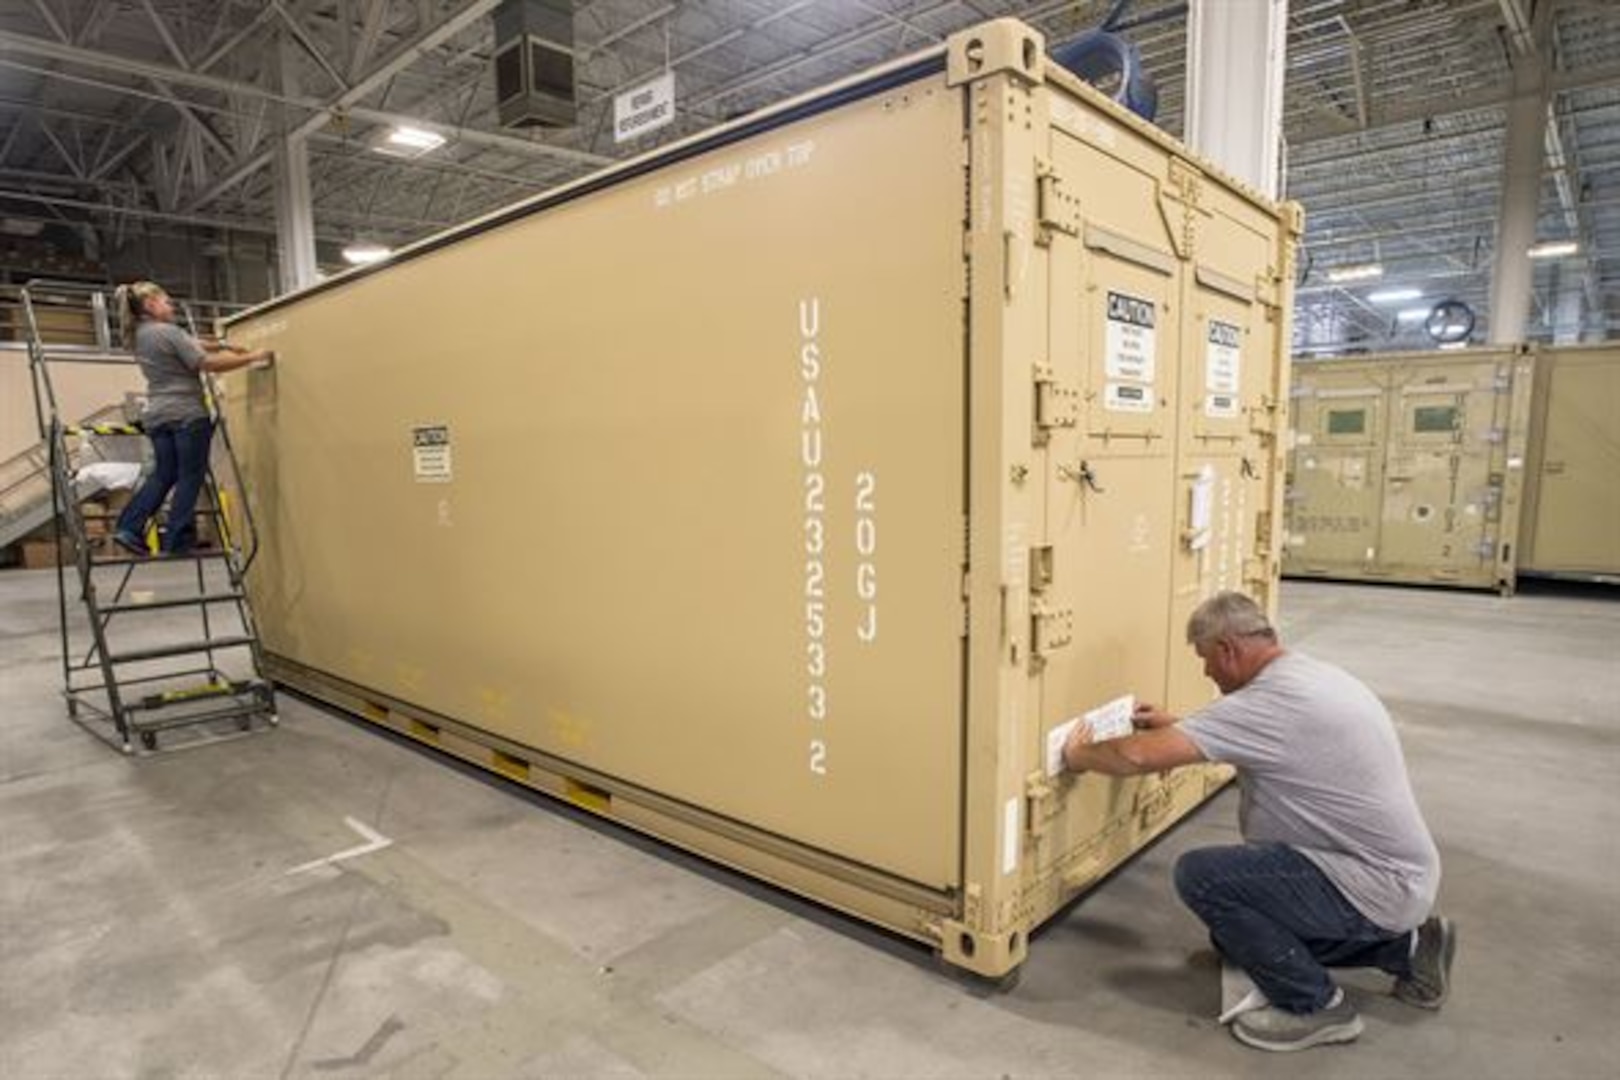 DLA Distribution Hill provides deployable hospitals to the warfighter